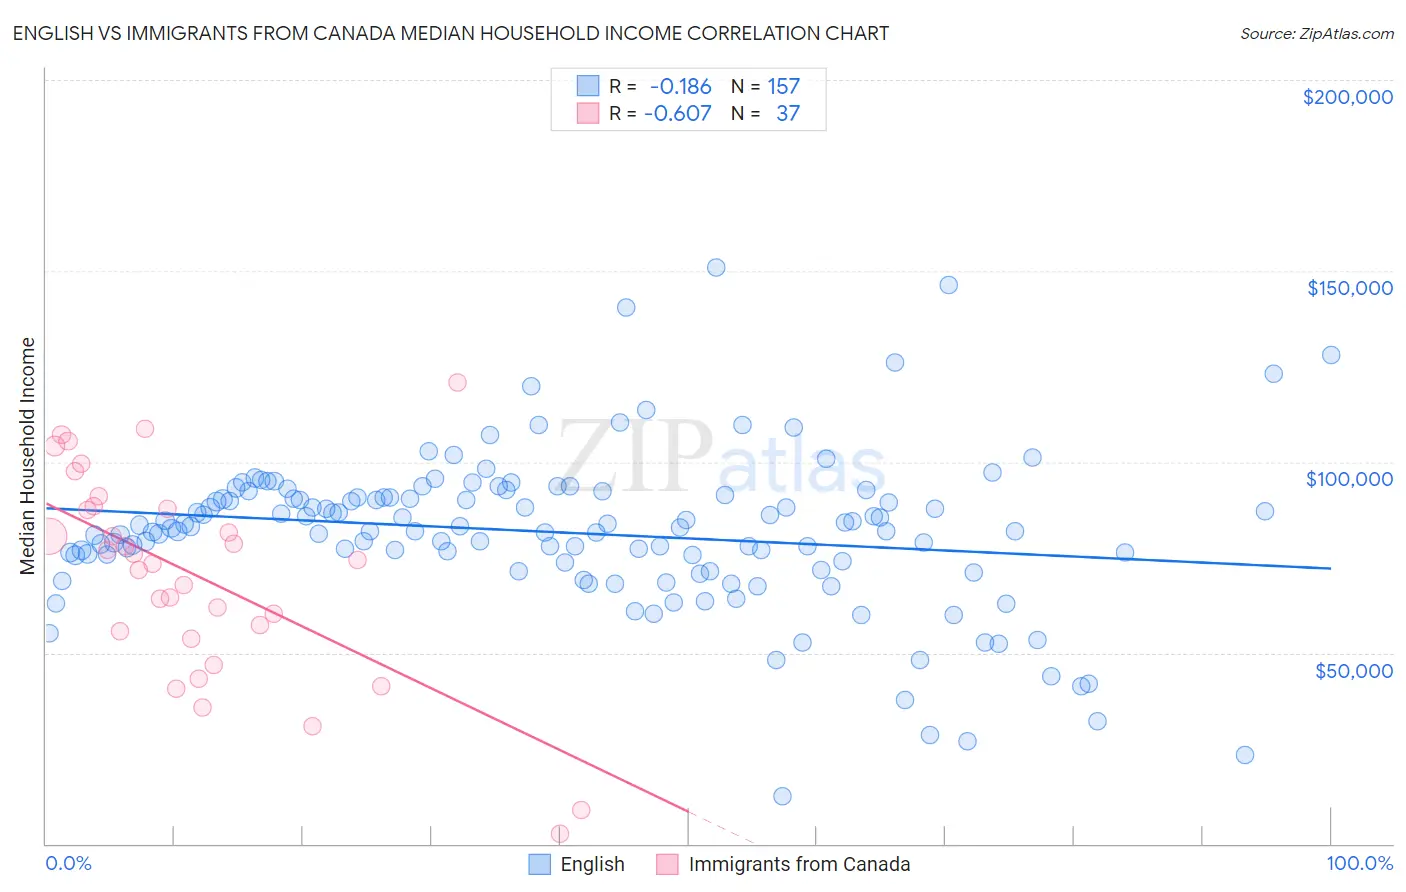 English vs Immigrants from Canada Median Household Income